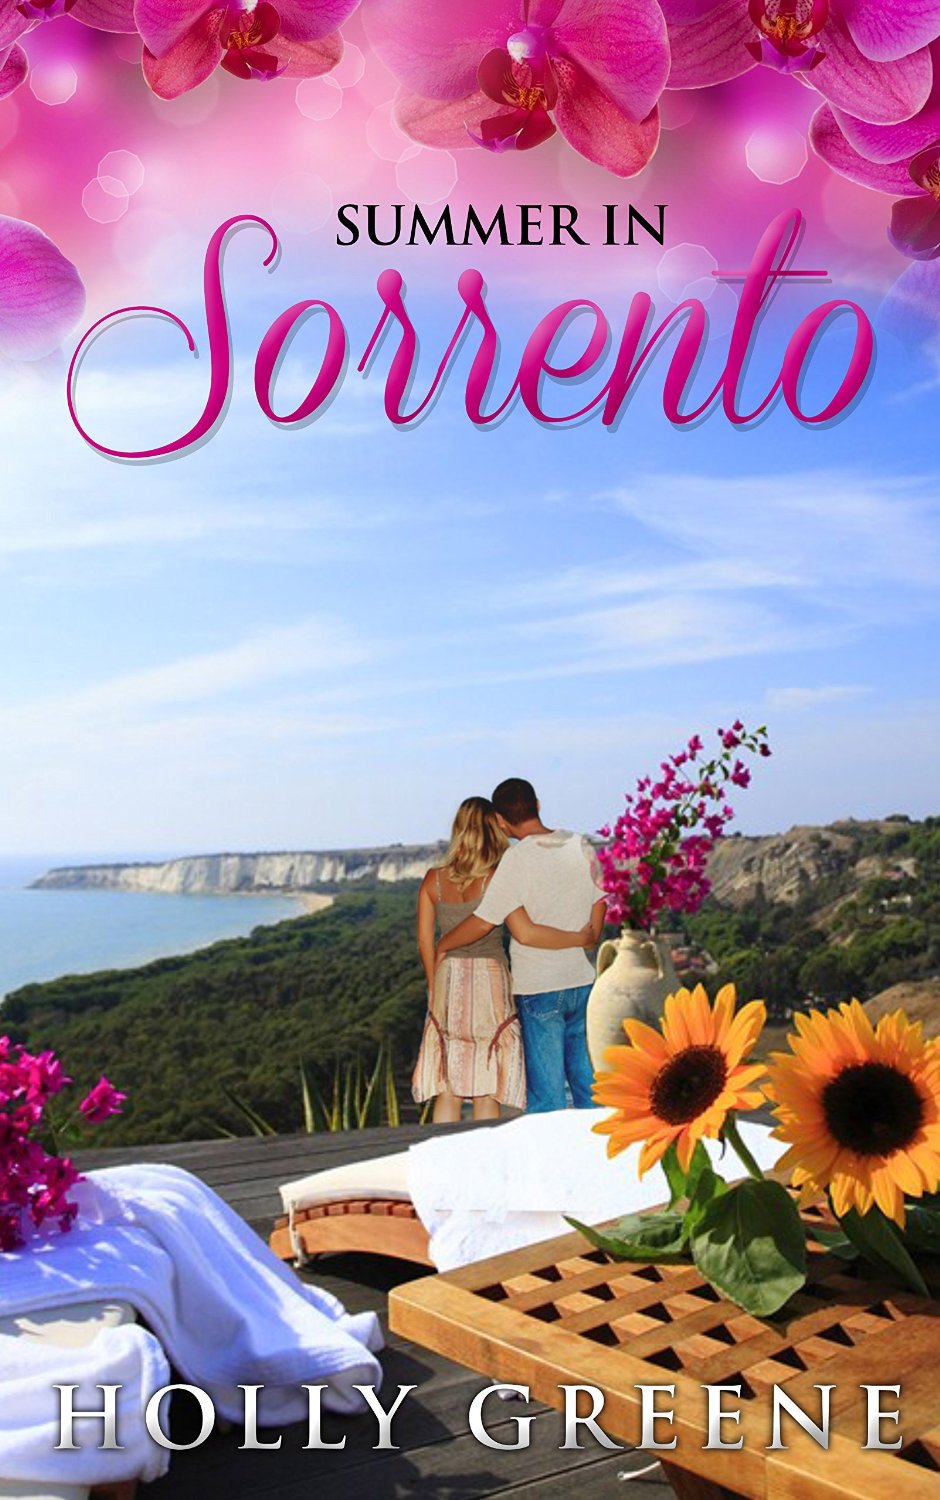 Summer in Sorrento (Escape to Italy) by Holly Greene